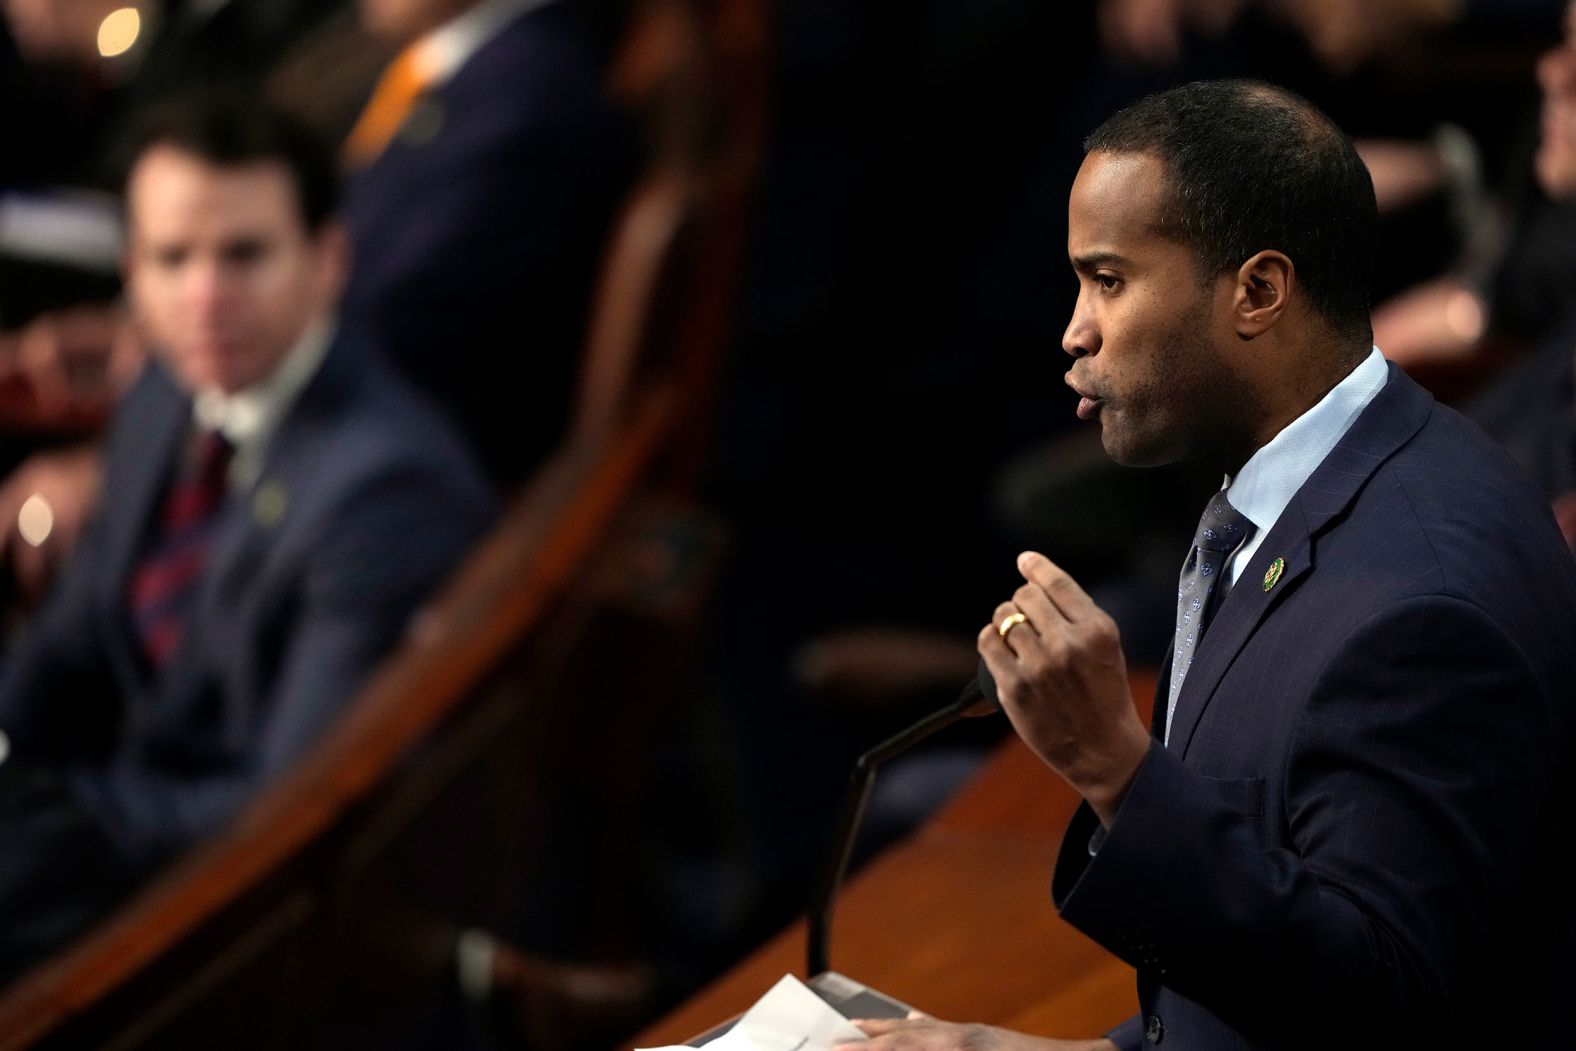 US Rep. John James, a Republican from Michigan, nominated McCarthy for the seventh vote. James <a href="index.php?page=&url=https%3A%2F%2Fwww.cnn.com%2Fpolitics%2Flive-news%2Fhouse-speaker-leadership-vote-01-05-23%2Fh_d8549119fda272945e587065d91b95f0" target="_blank">made a plea for unity</a> in his nomination speech, saying, the "issues that divide us today are much less severe that they were in 1856; in fact, there's far more that unite us, than divide us, regardless of our political party of ideology."